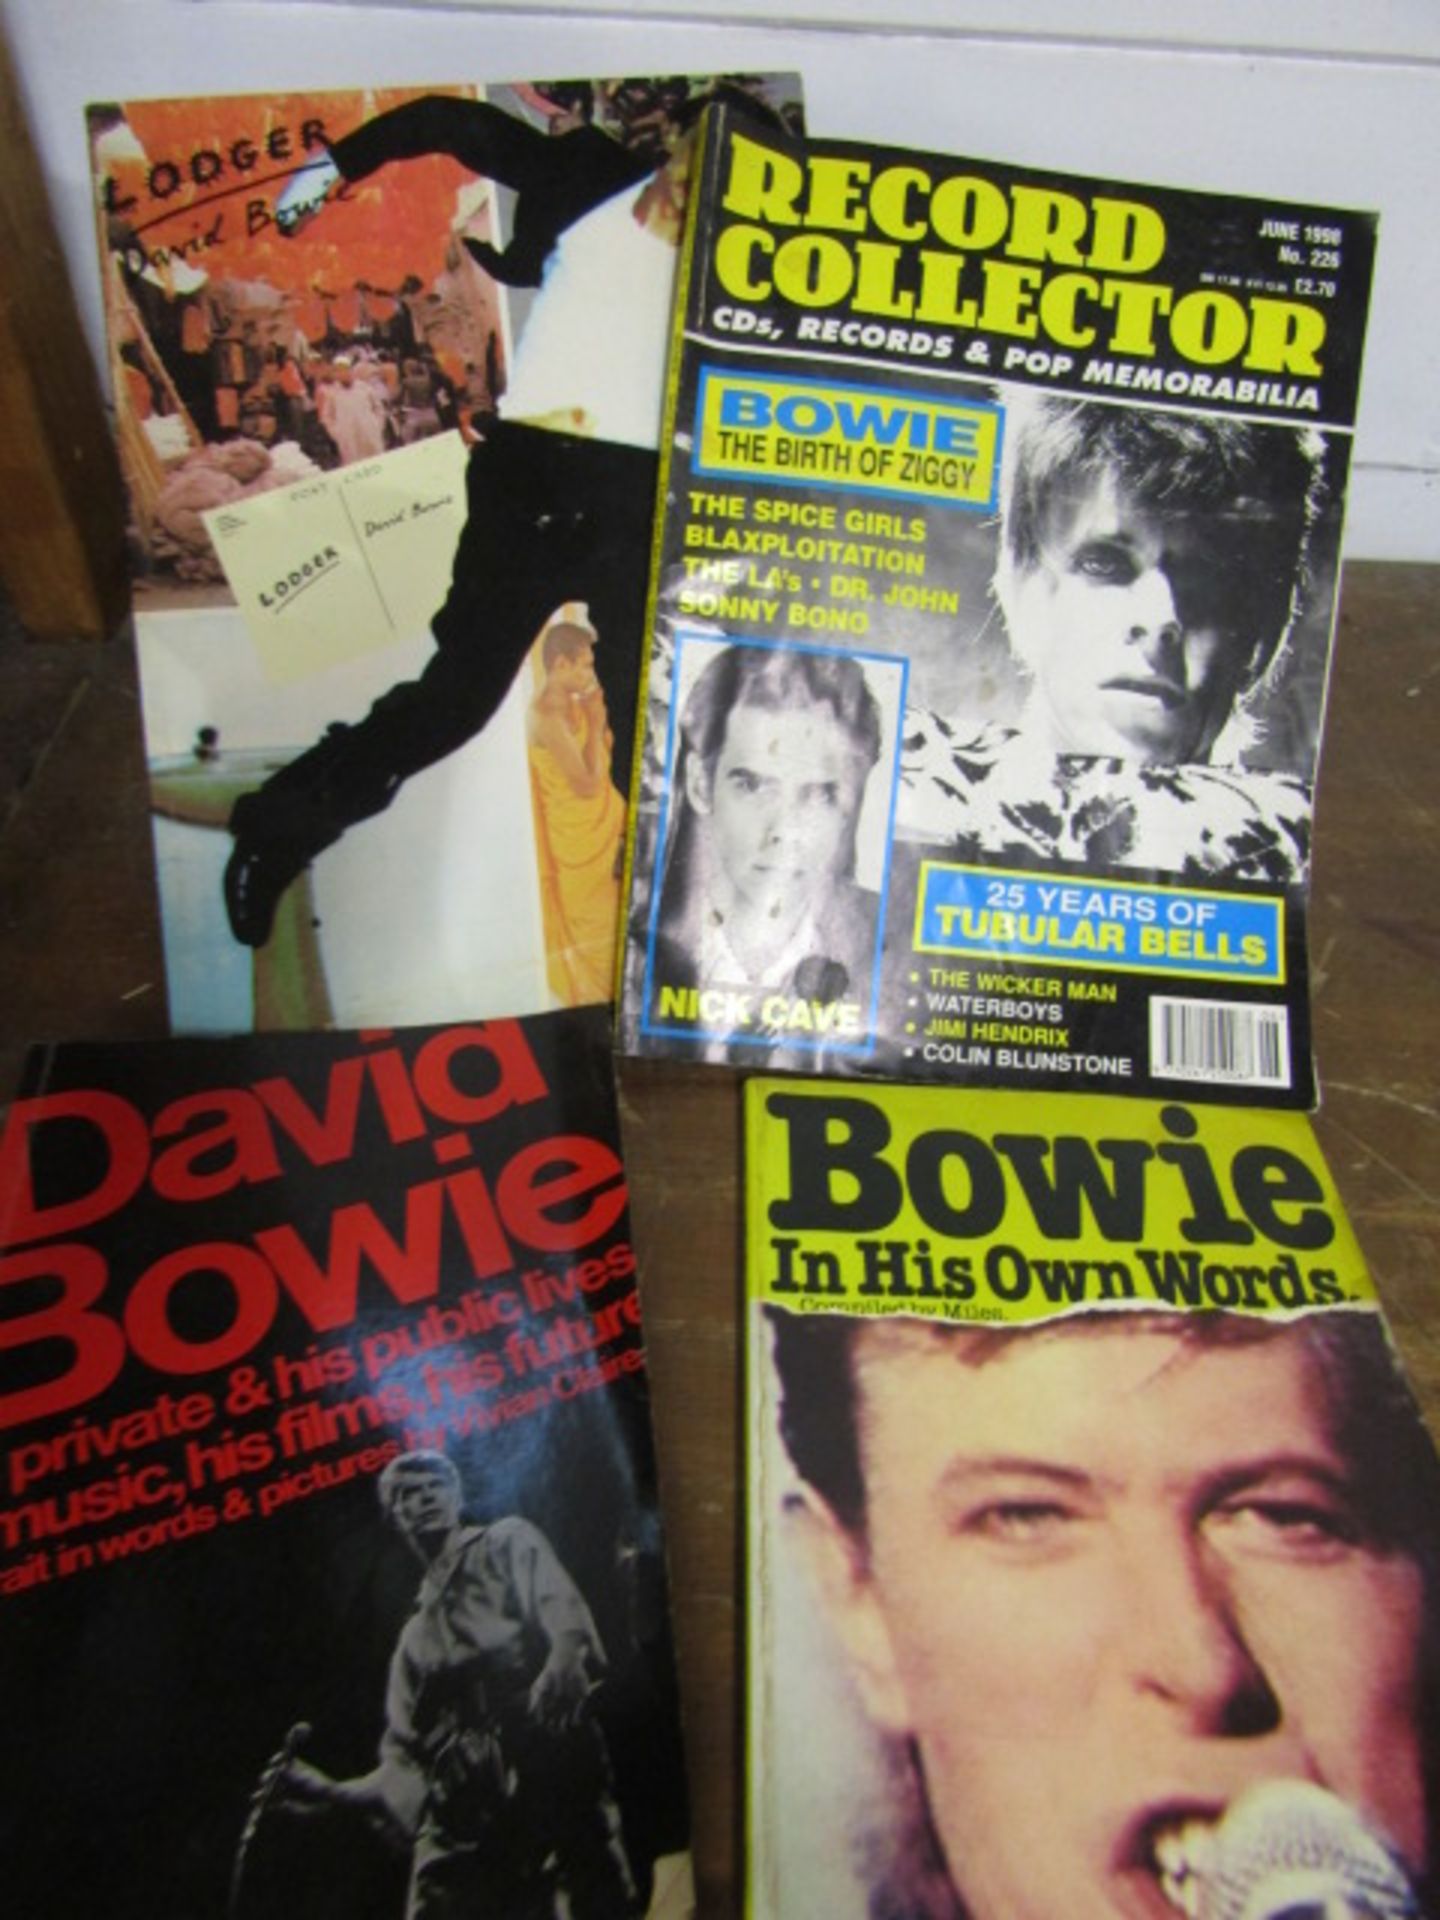 Signed? David Bowie books, mags one with signature - unsure if legit plus U2 books - Image 3 of 4